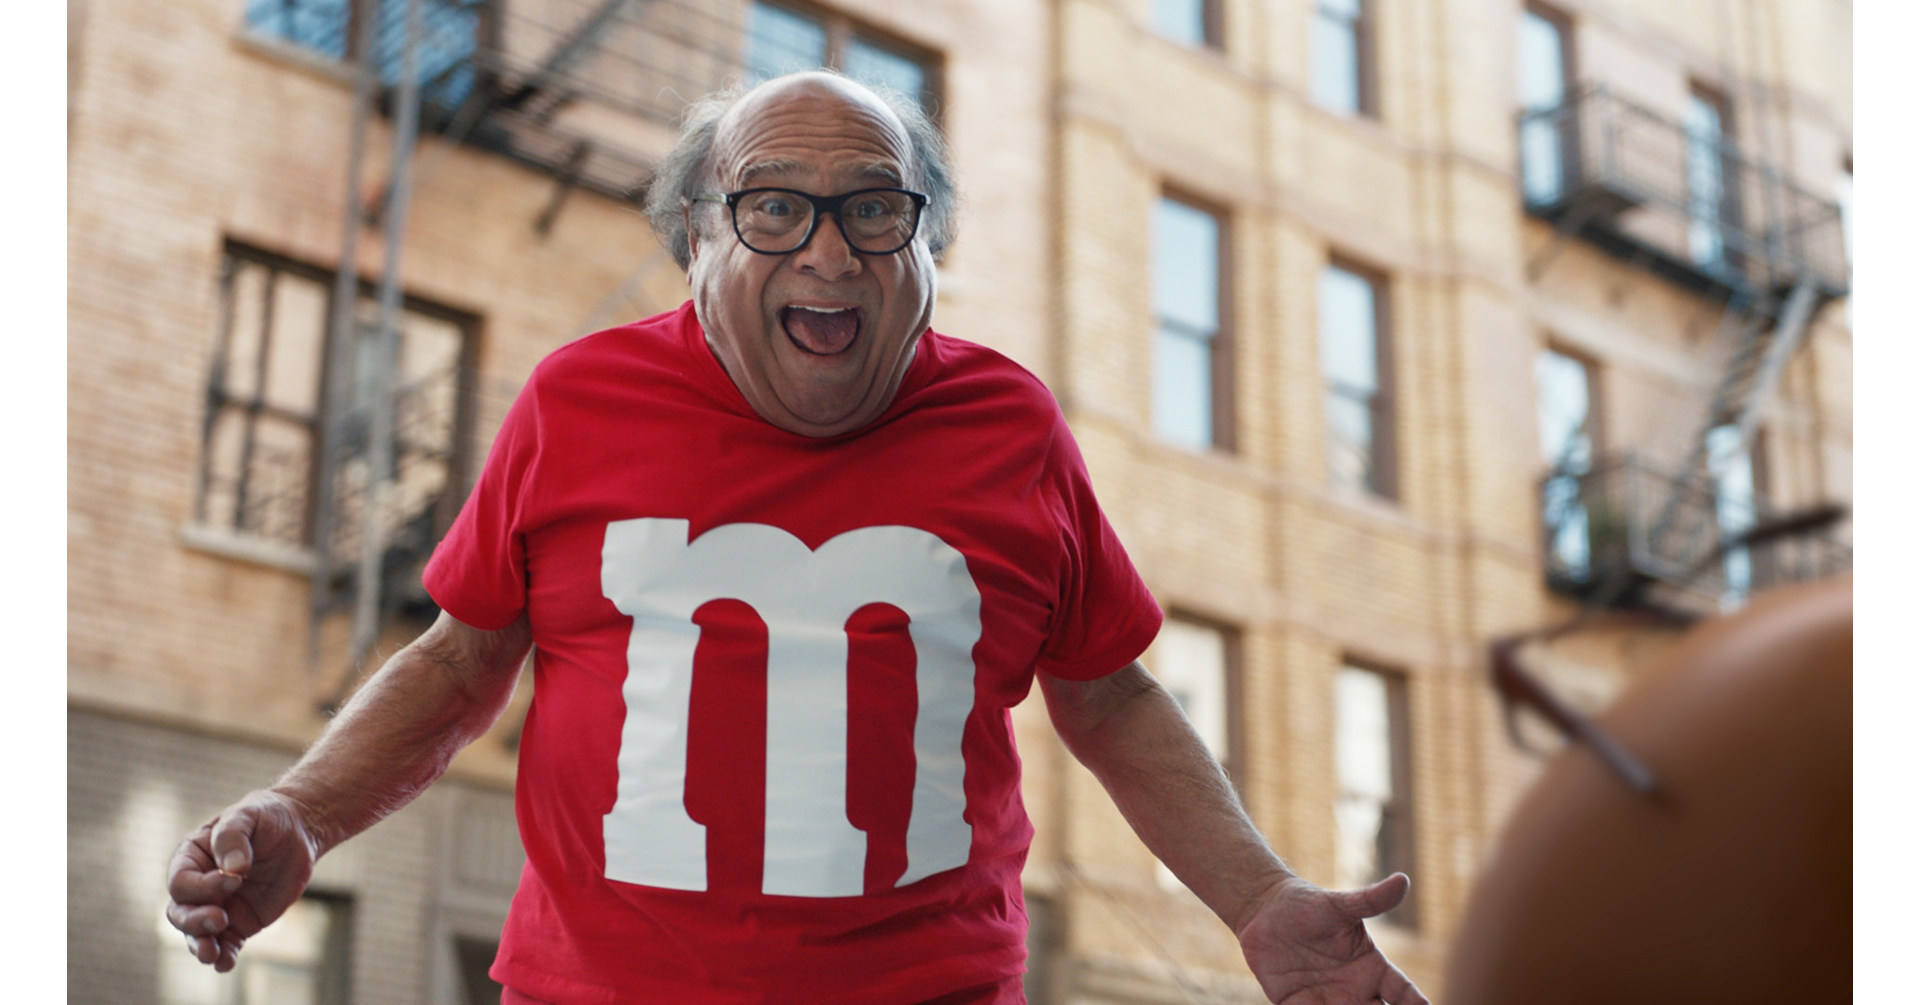 The M&M Spokescandies Announce Their Return in Super Bowl Commercial